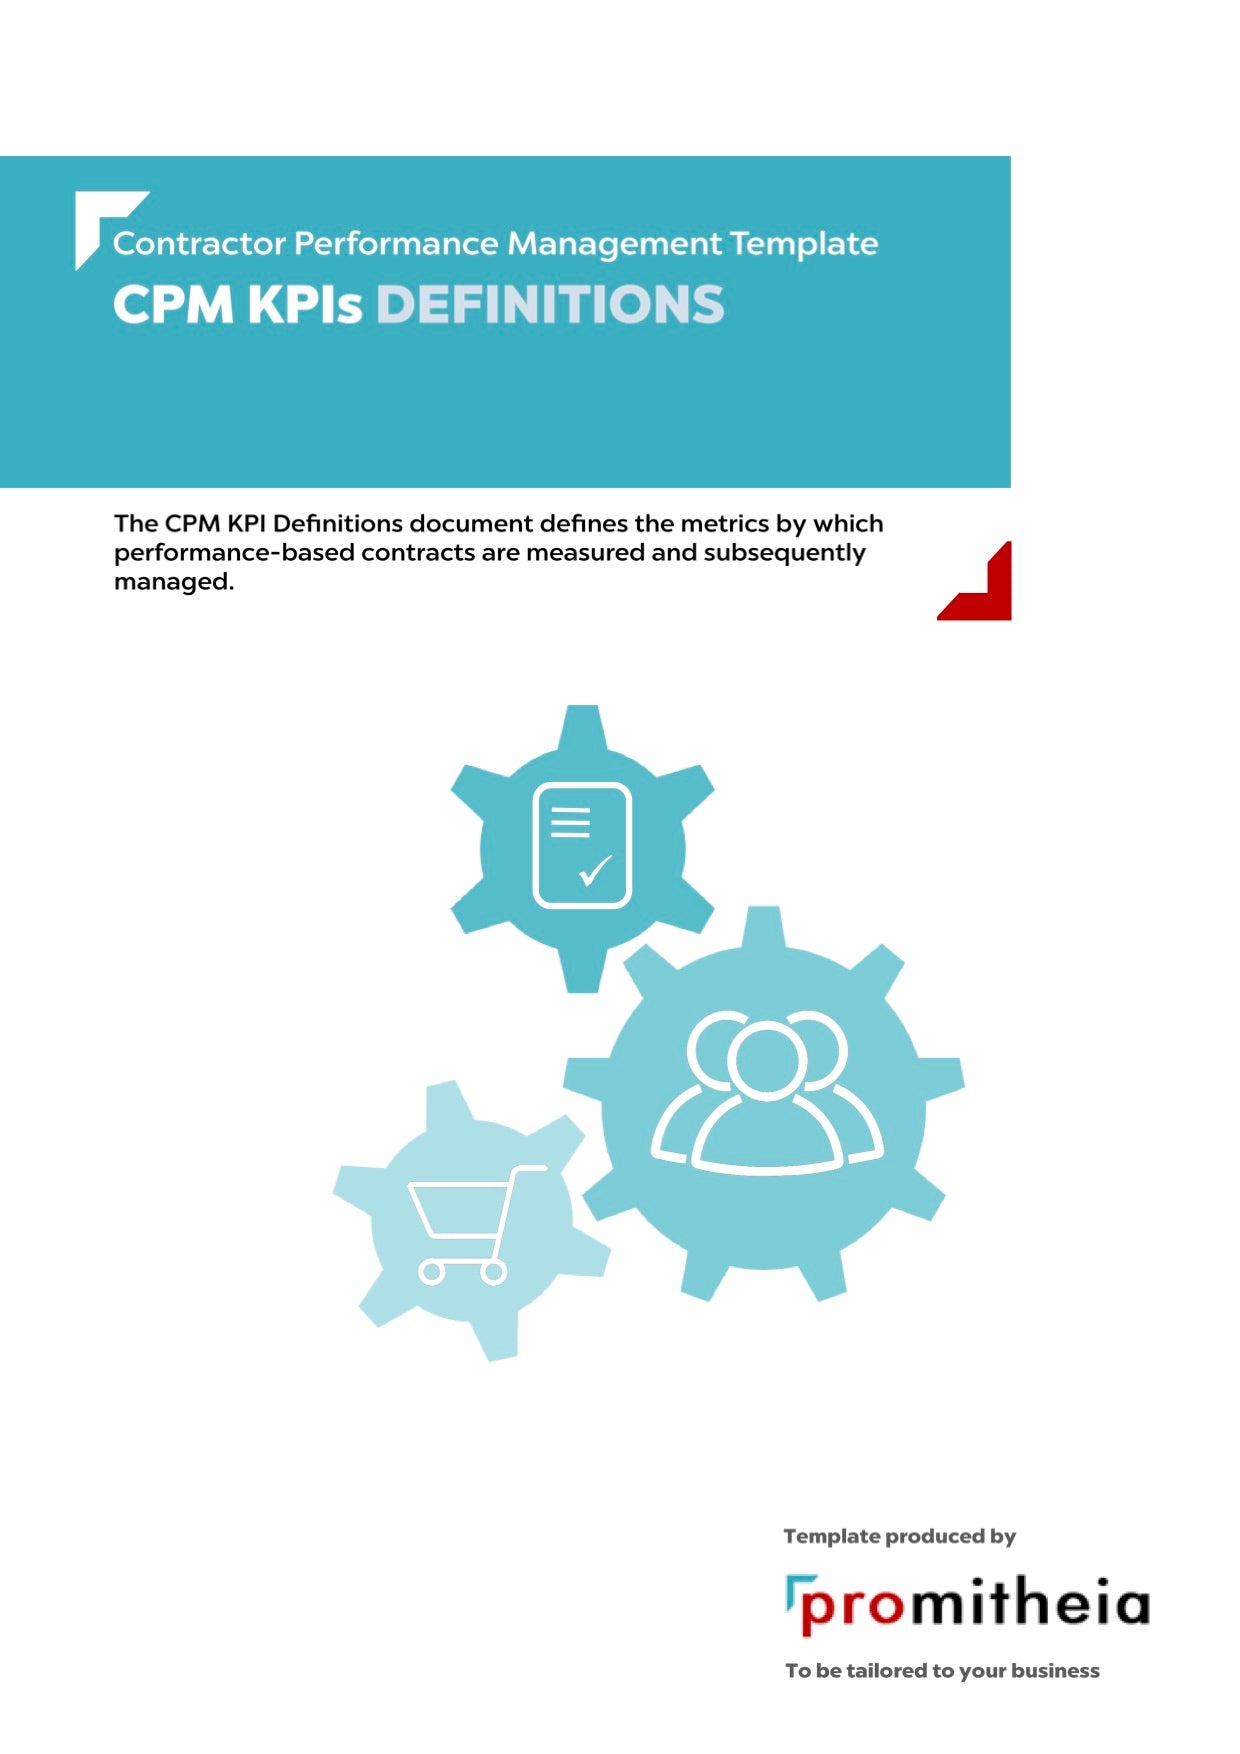 Contractor Performance Management Key Performance Indicators Definitions (CPM KPI Definitions)